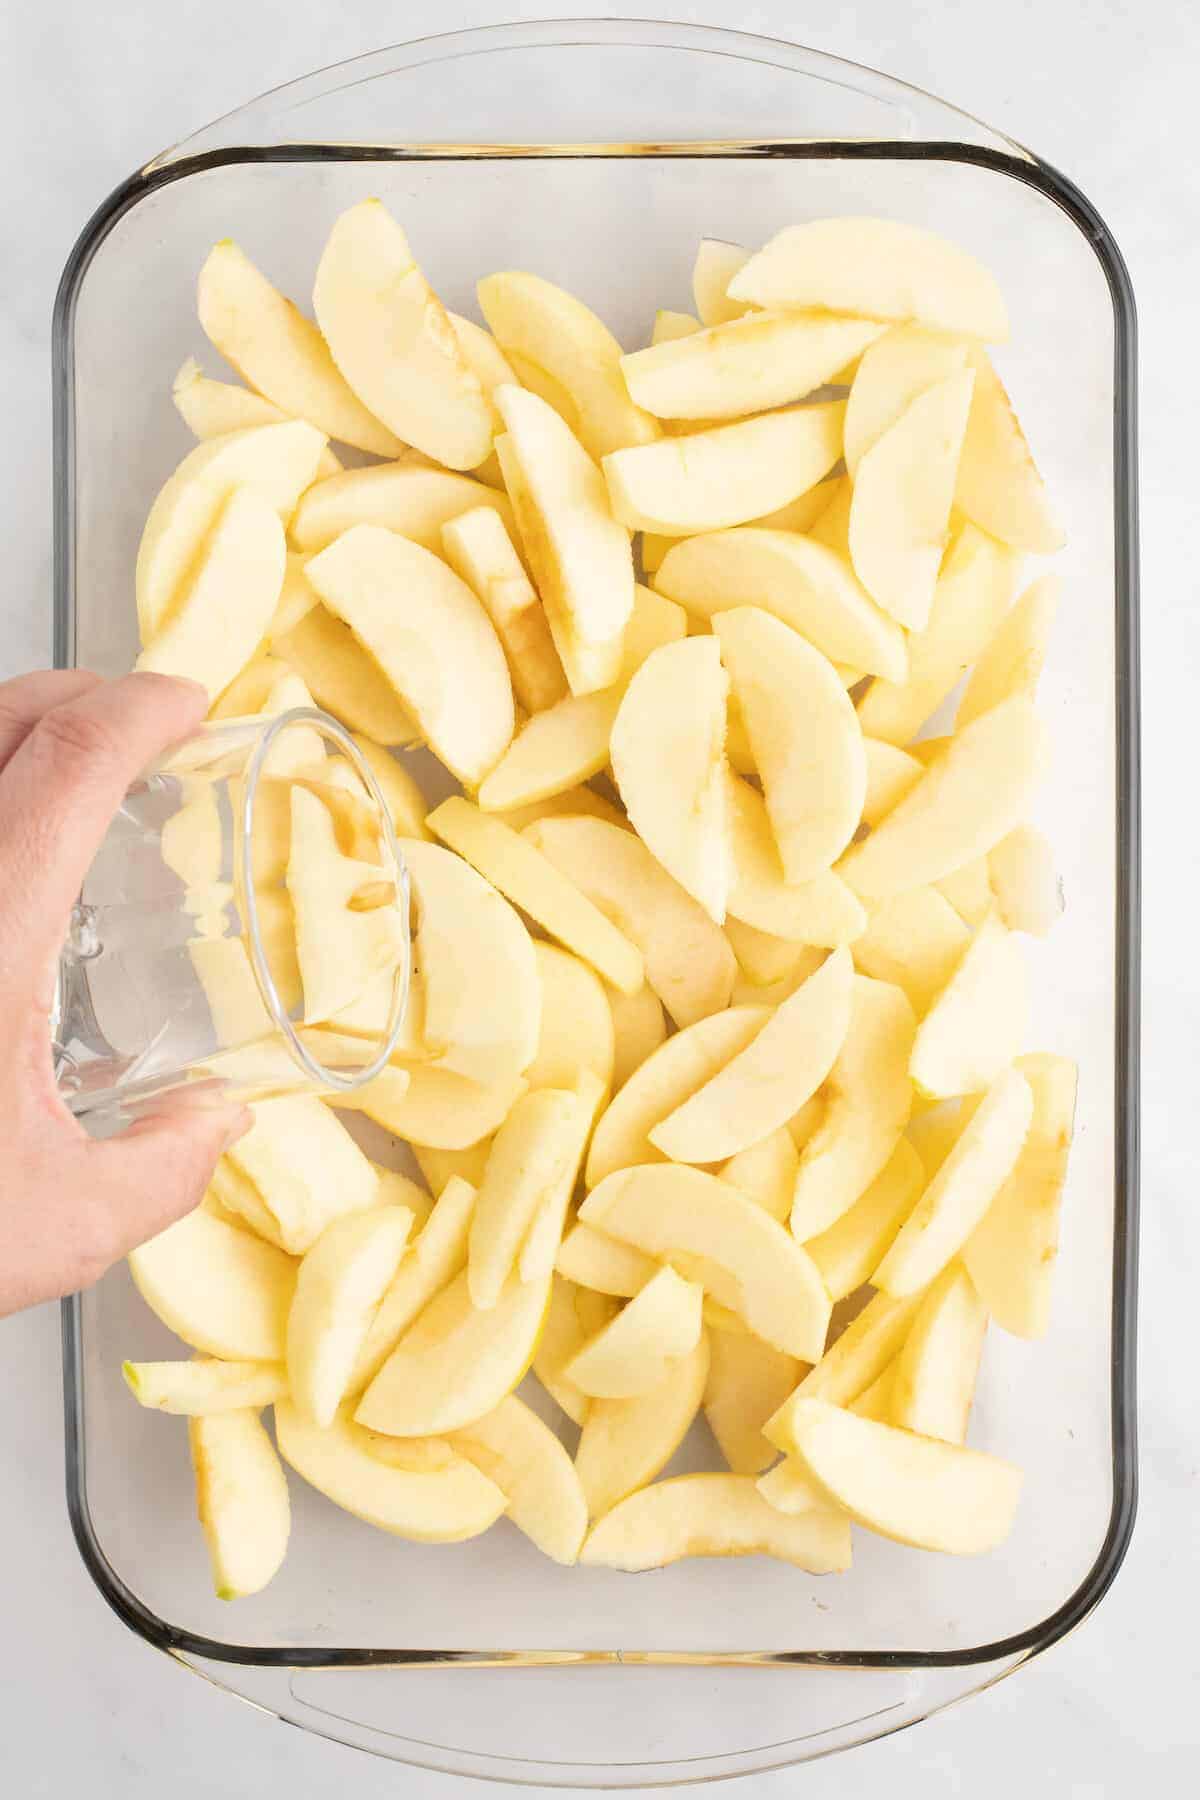 baking dish with apple slices and pouring a little water to the top of the slices.